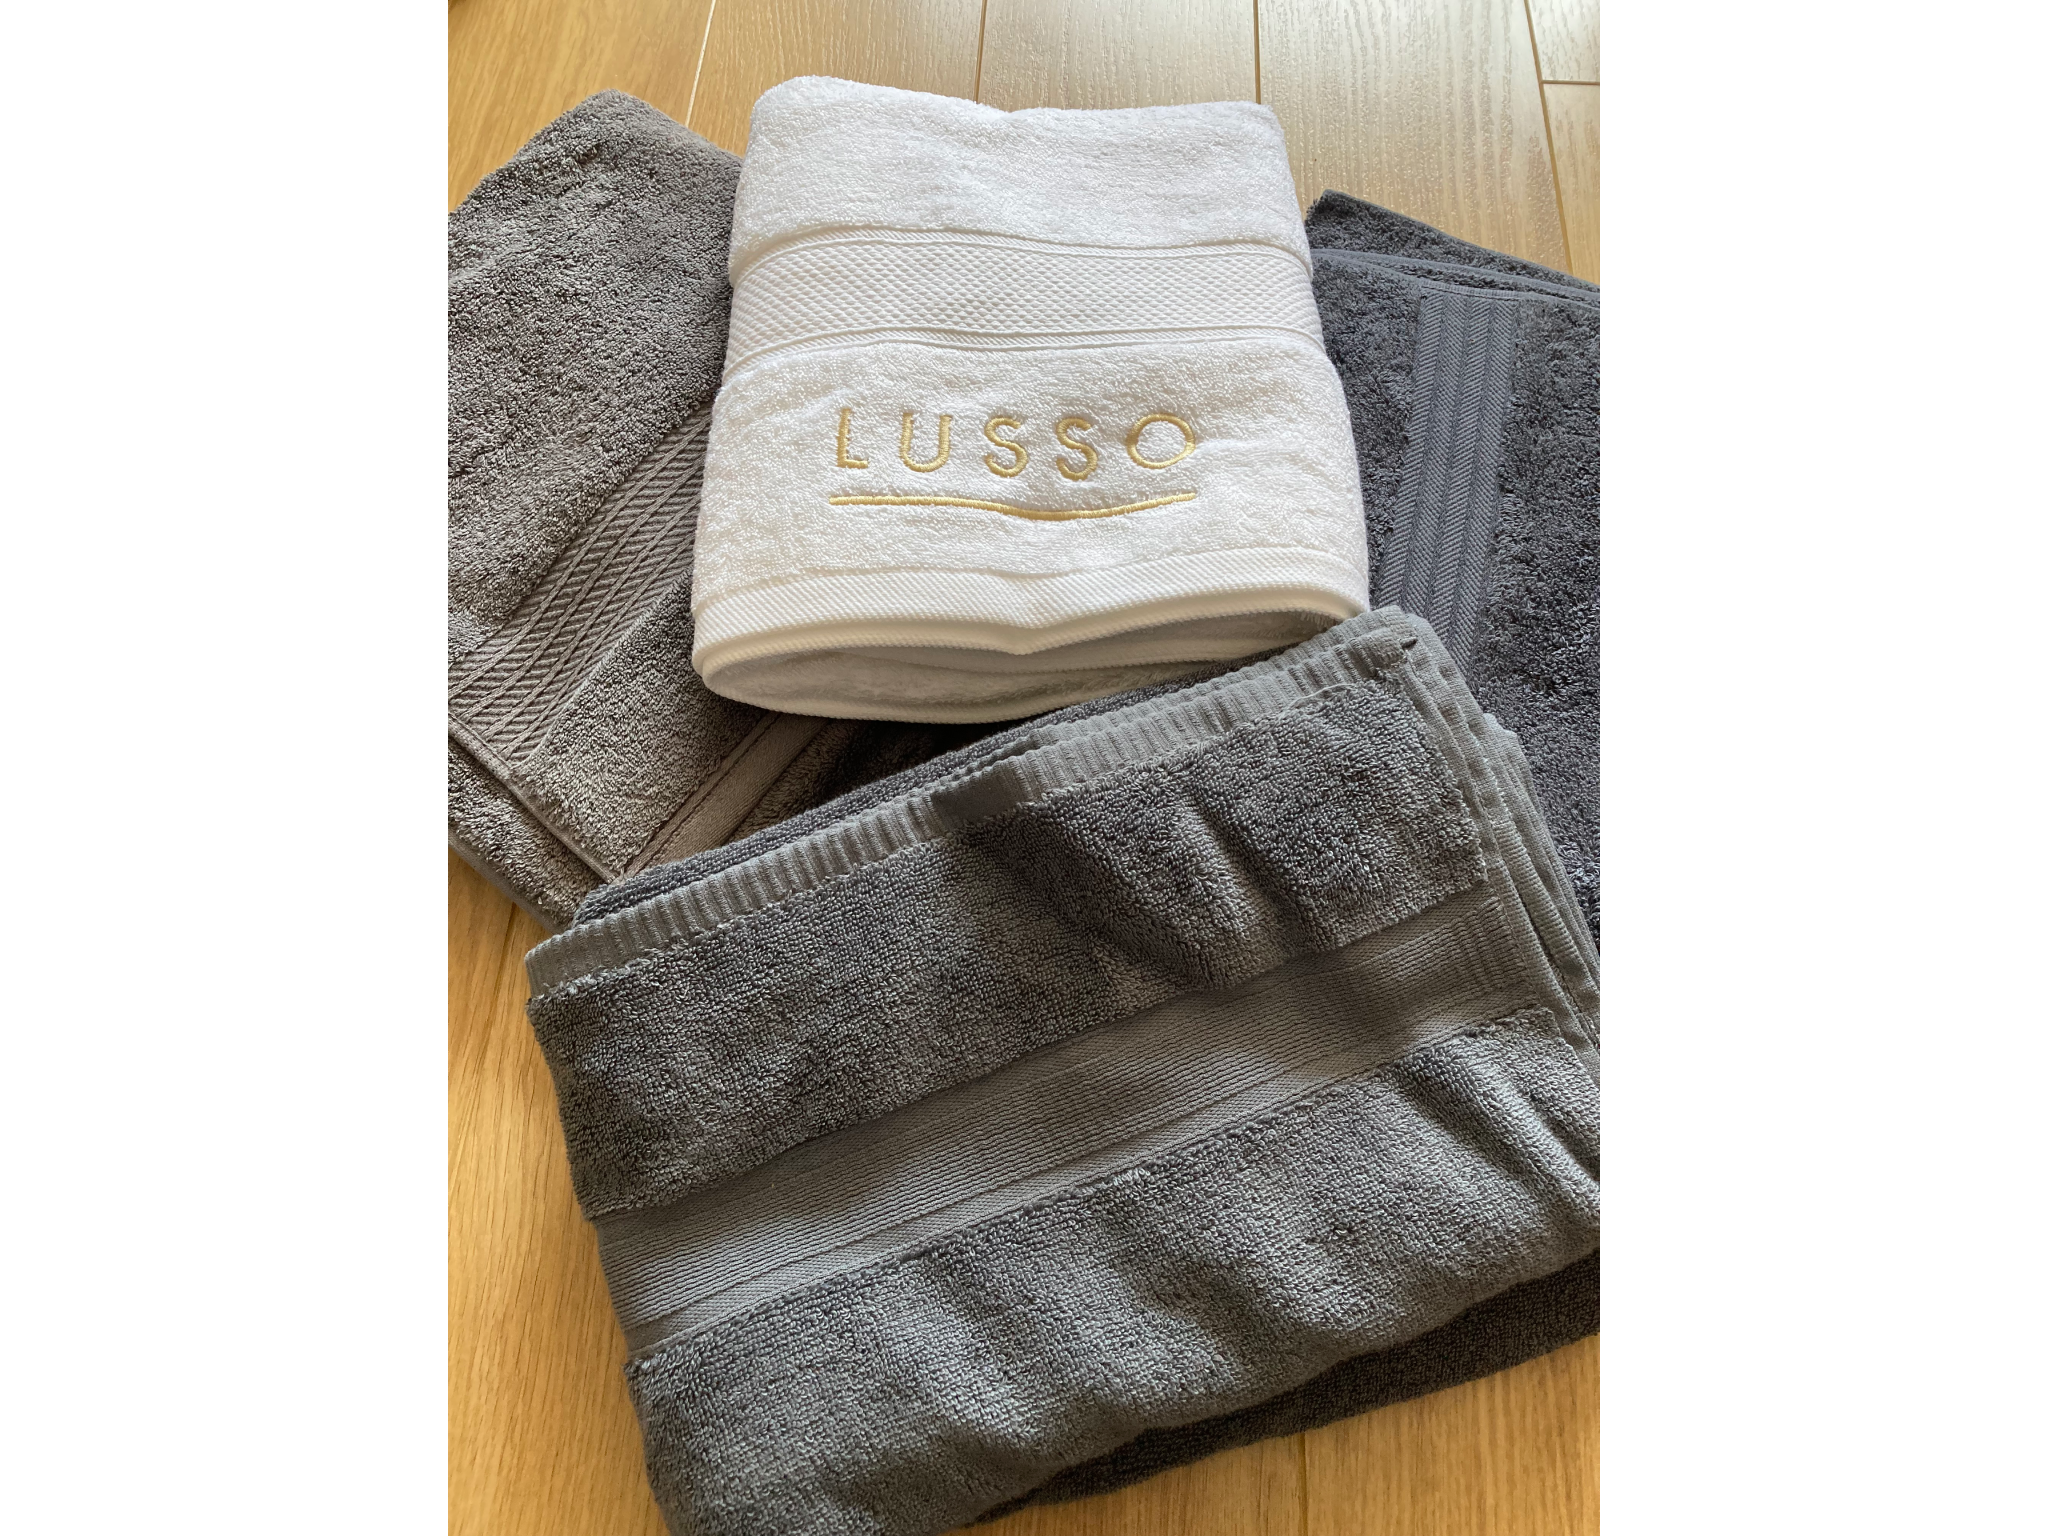 A selection of the towels we tested